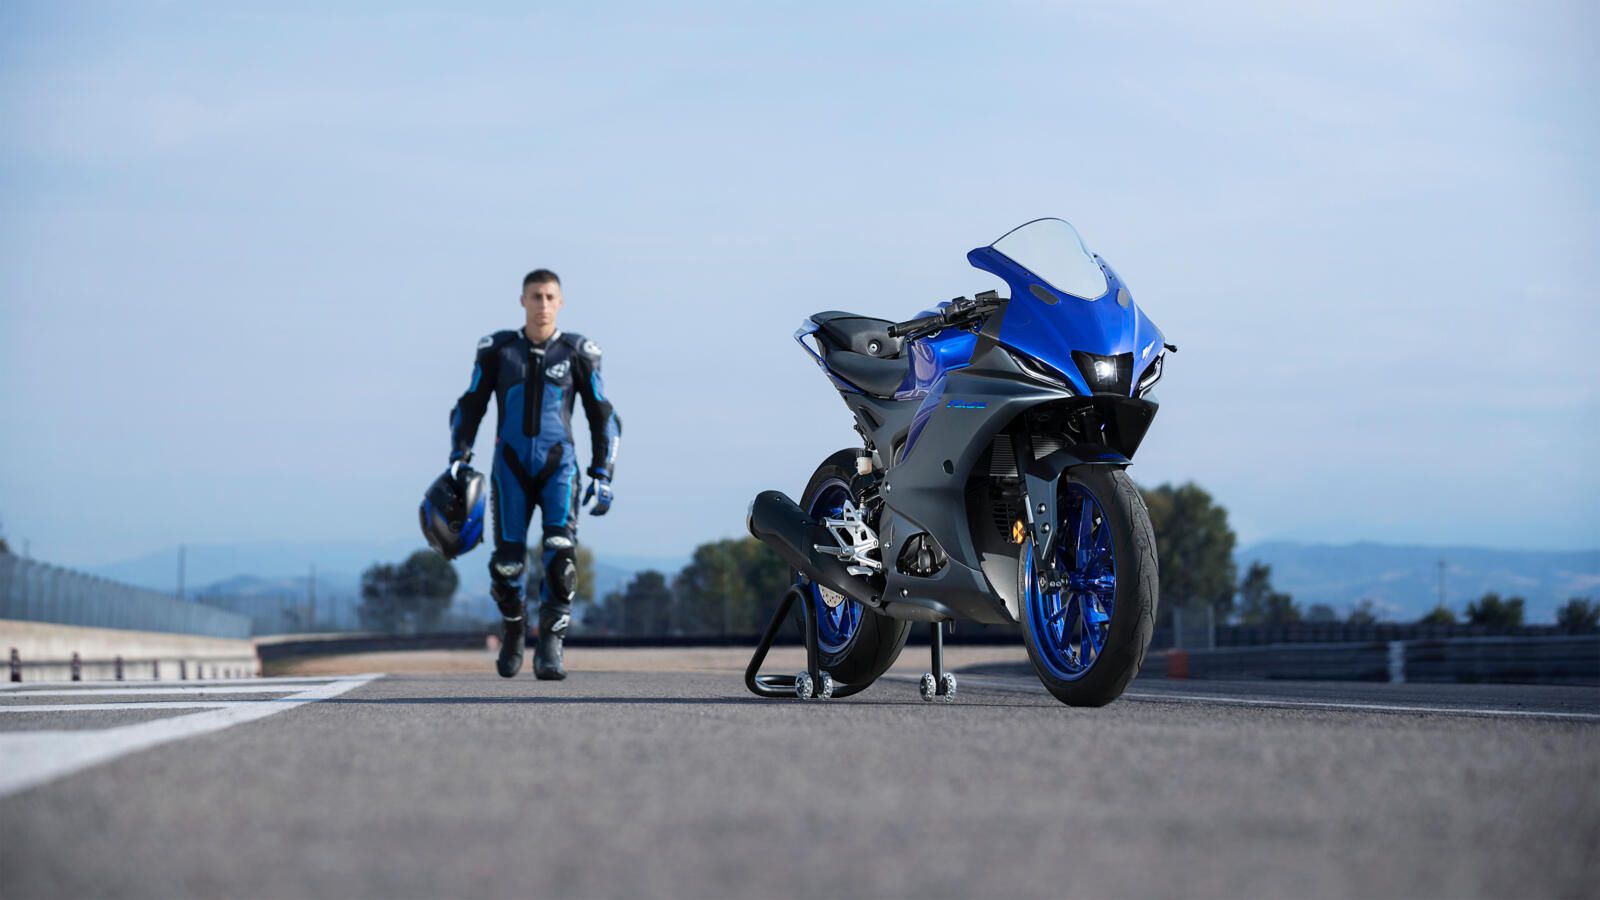 Track stands make it legit; the Yamaha R125 and European rider about to start up track day.